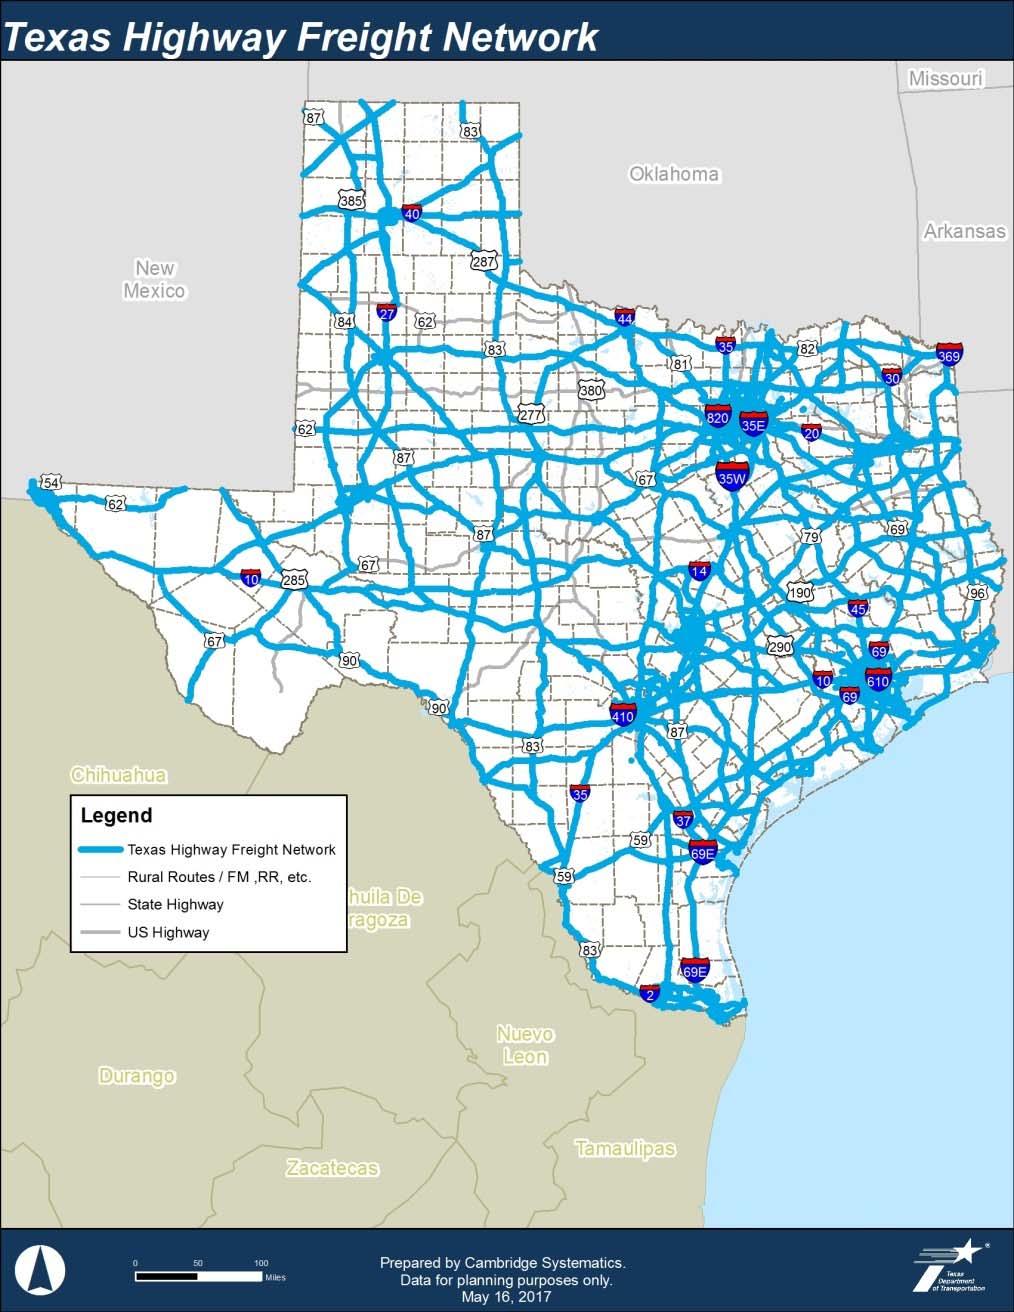 Texas Highway Freight Network (THFN) Designation Based on recommendations from TxFAC, the Draft Texas Highway Freight Network includes: USDOT designated National Highway Freight Network; All highways